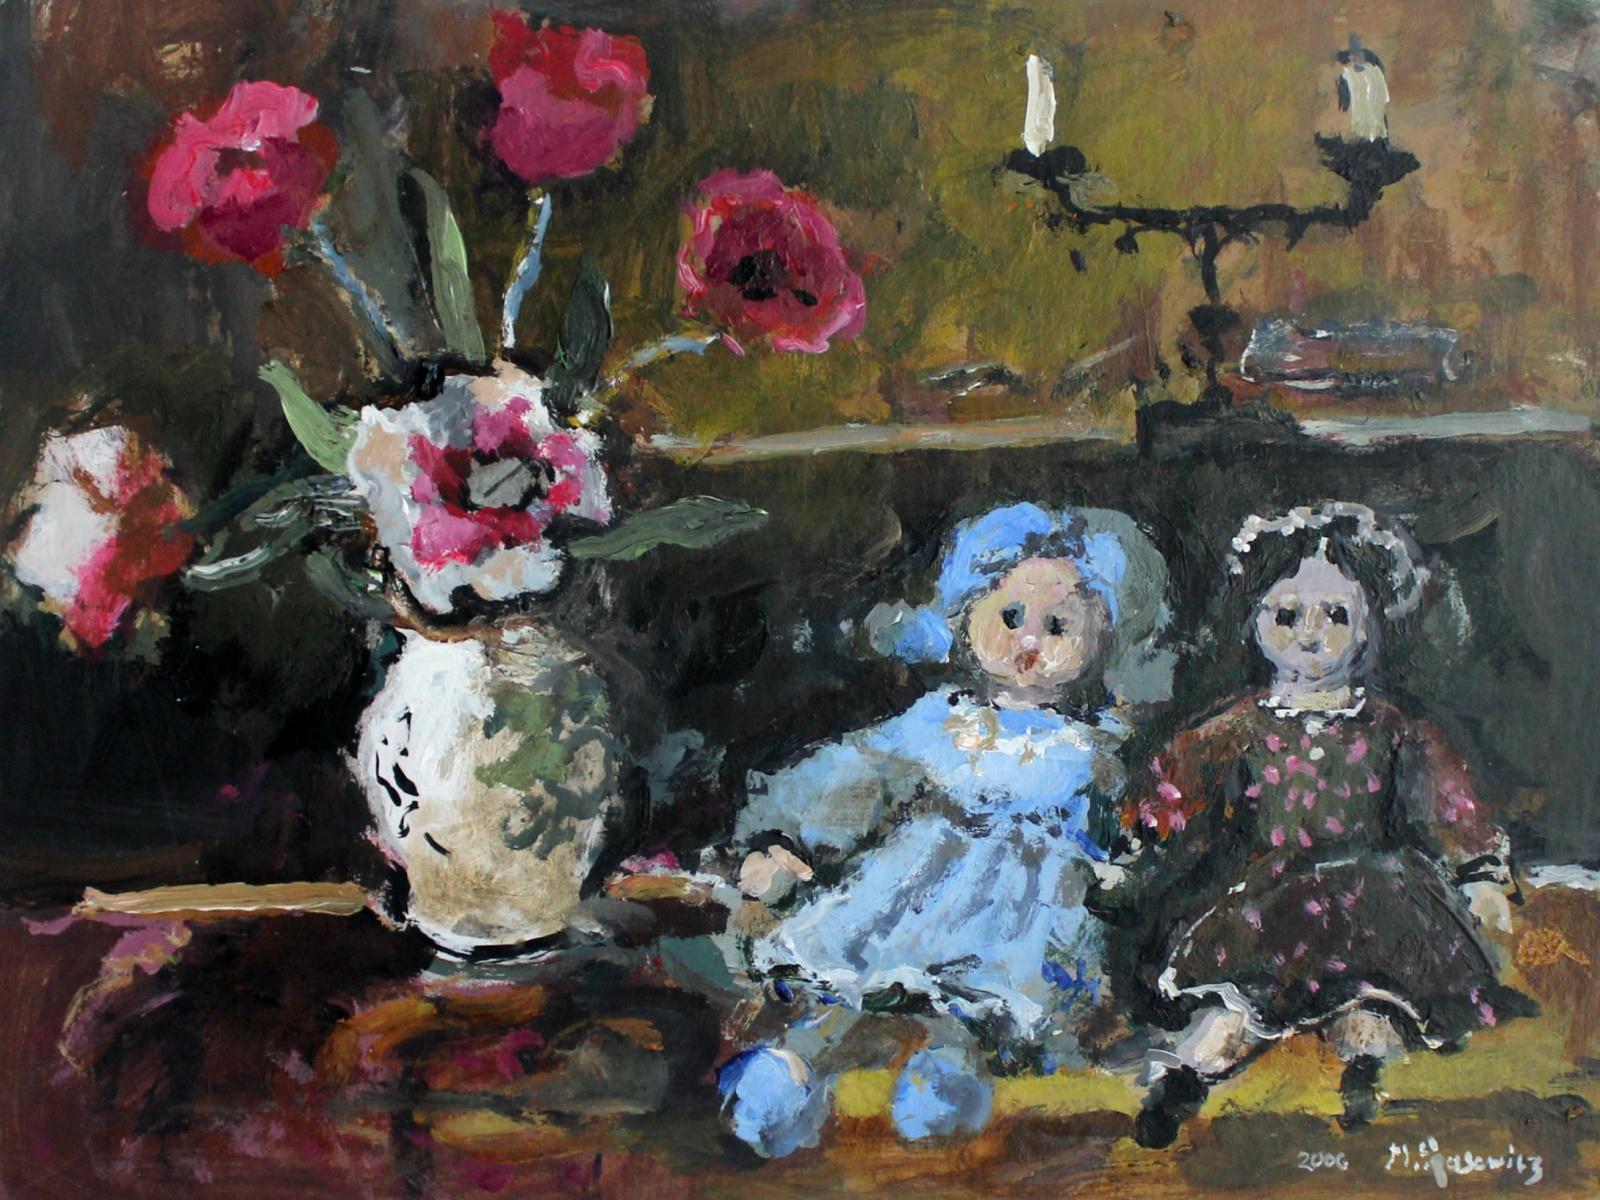 Still life with dolls - 21st century, Oil painting, Figurative, Grey tones